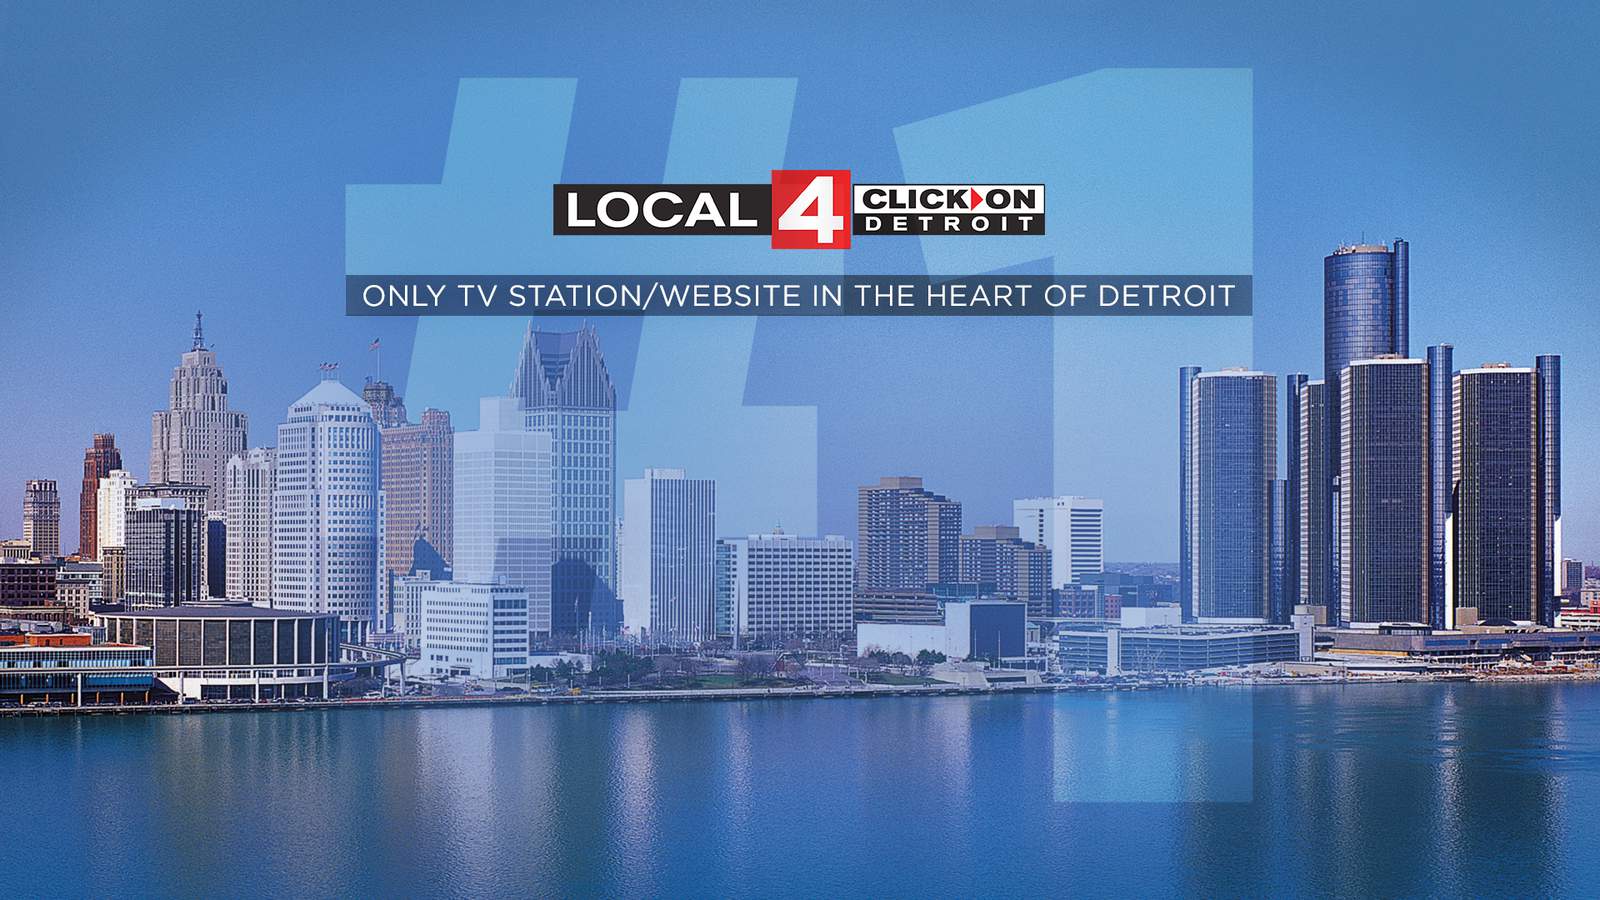 Local 4 and ClickOnDetroit No. 1 across media platforms